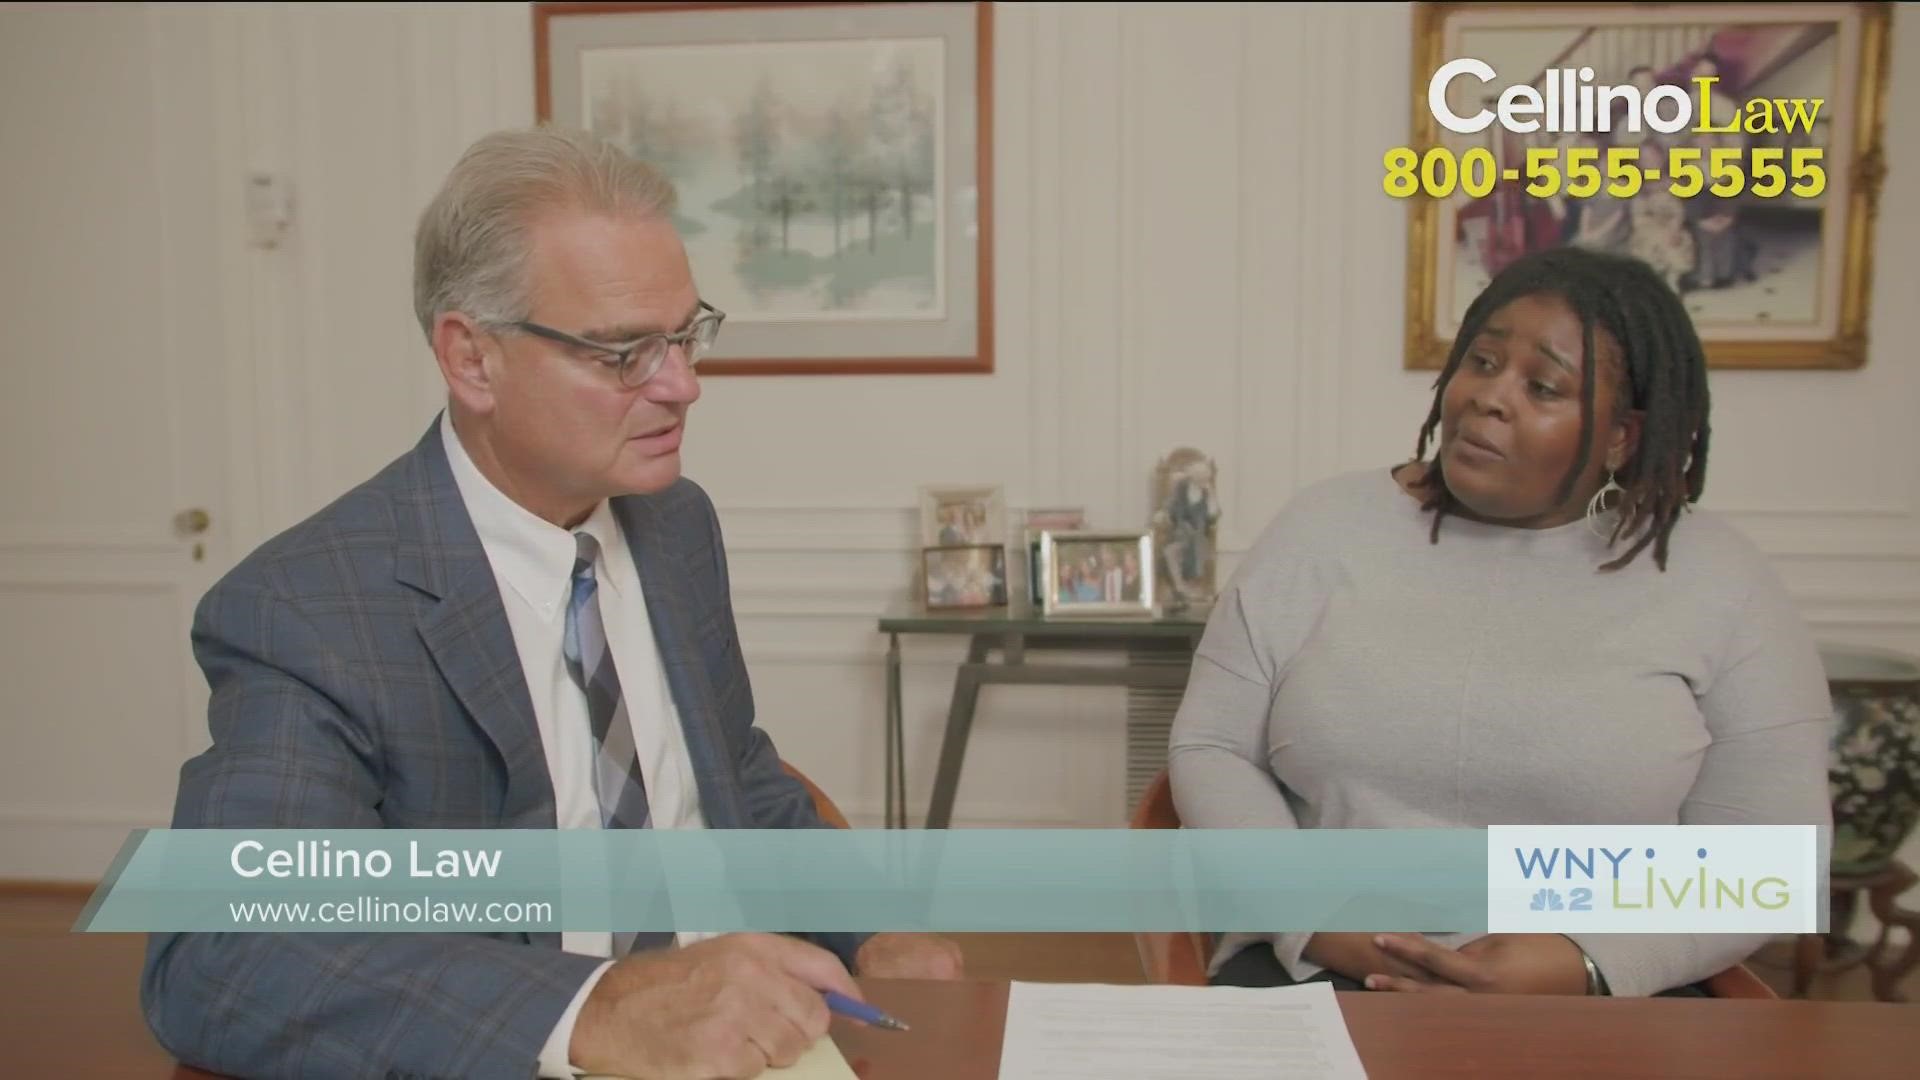 WNY Living - February 25 - Cellino Law (THIS VIDEO IS SPONSORED BY CELLINO LAW)